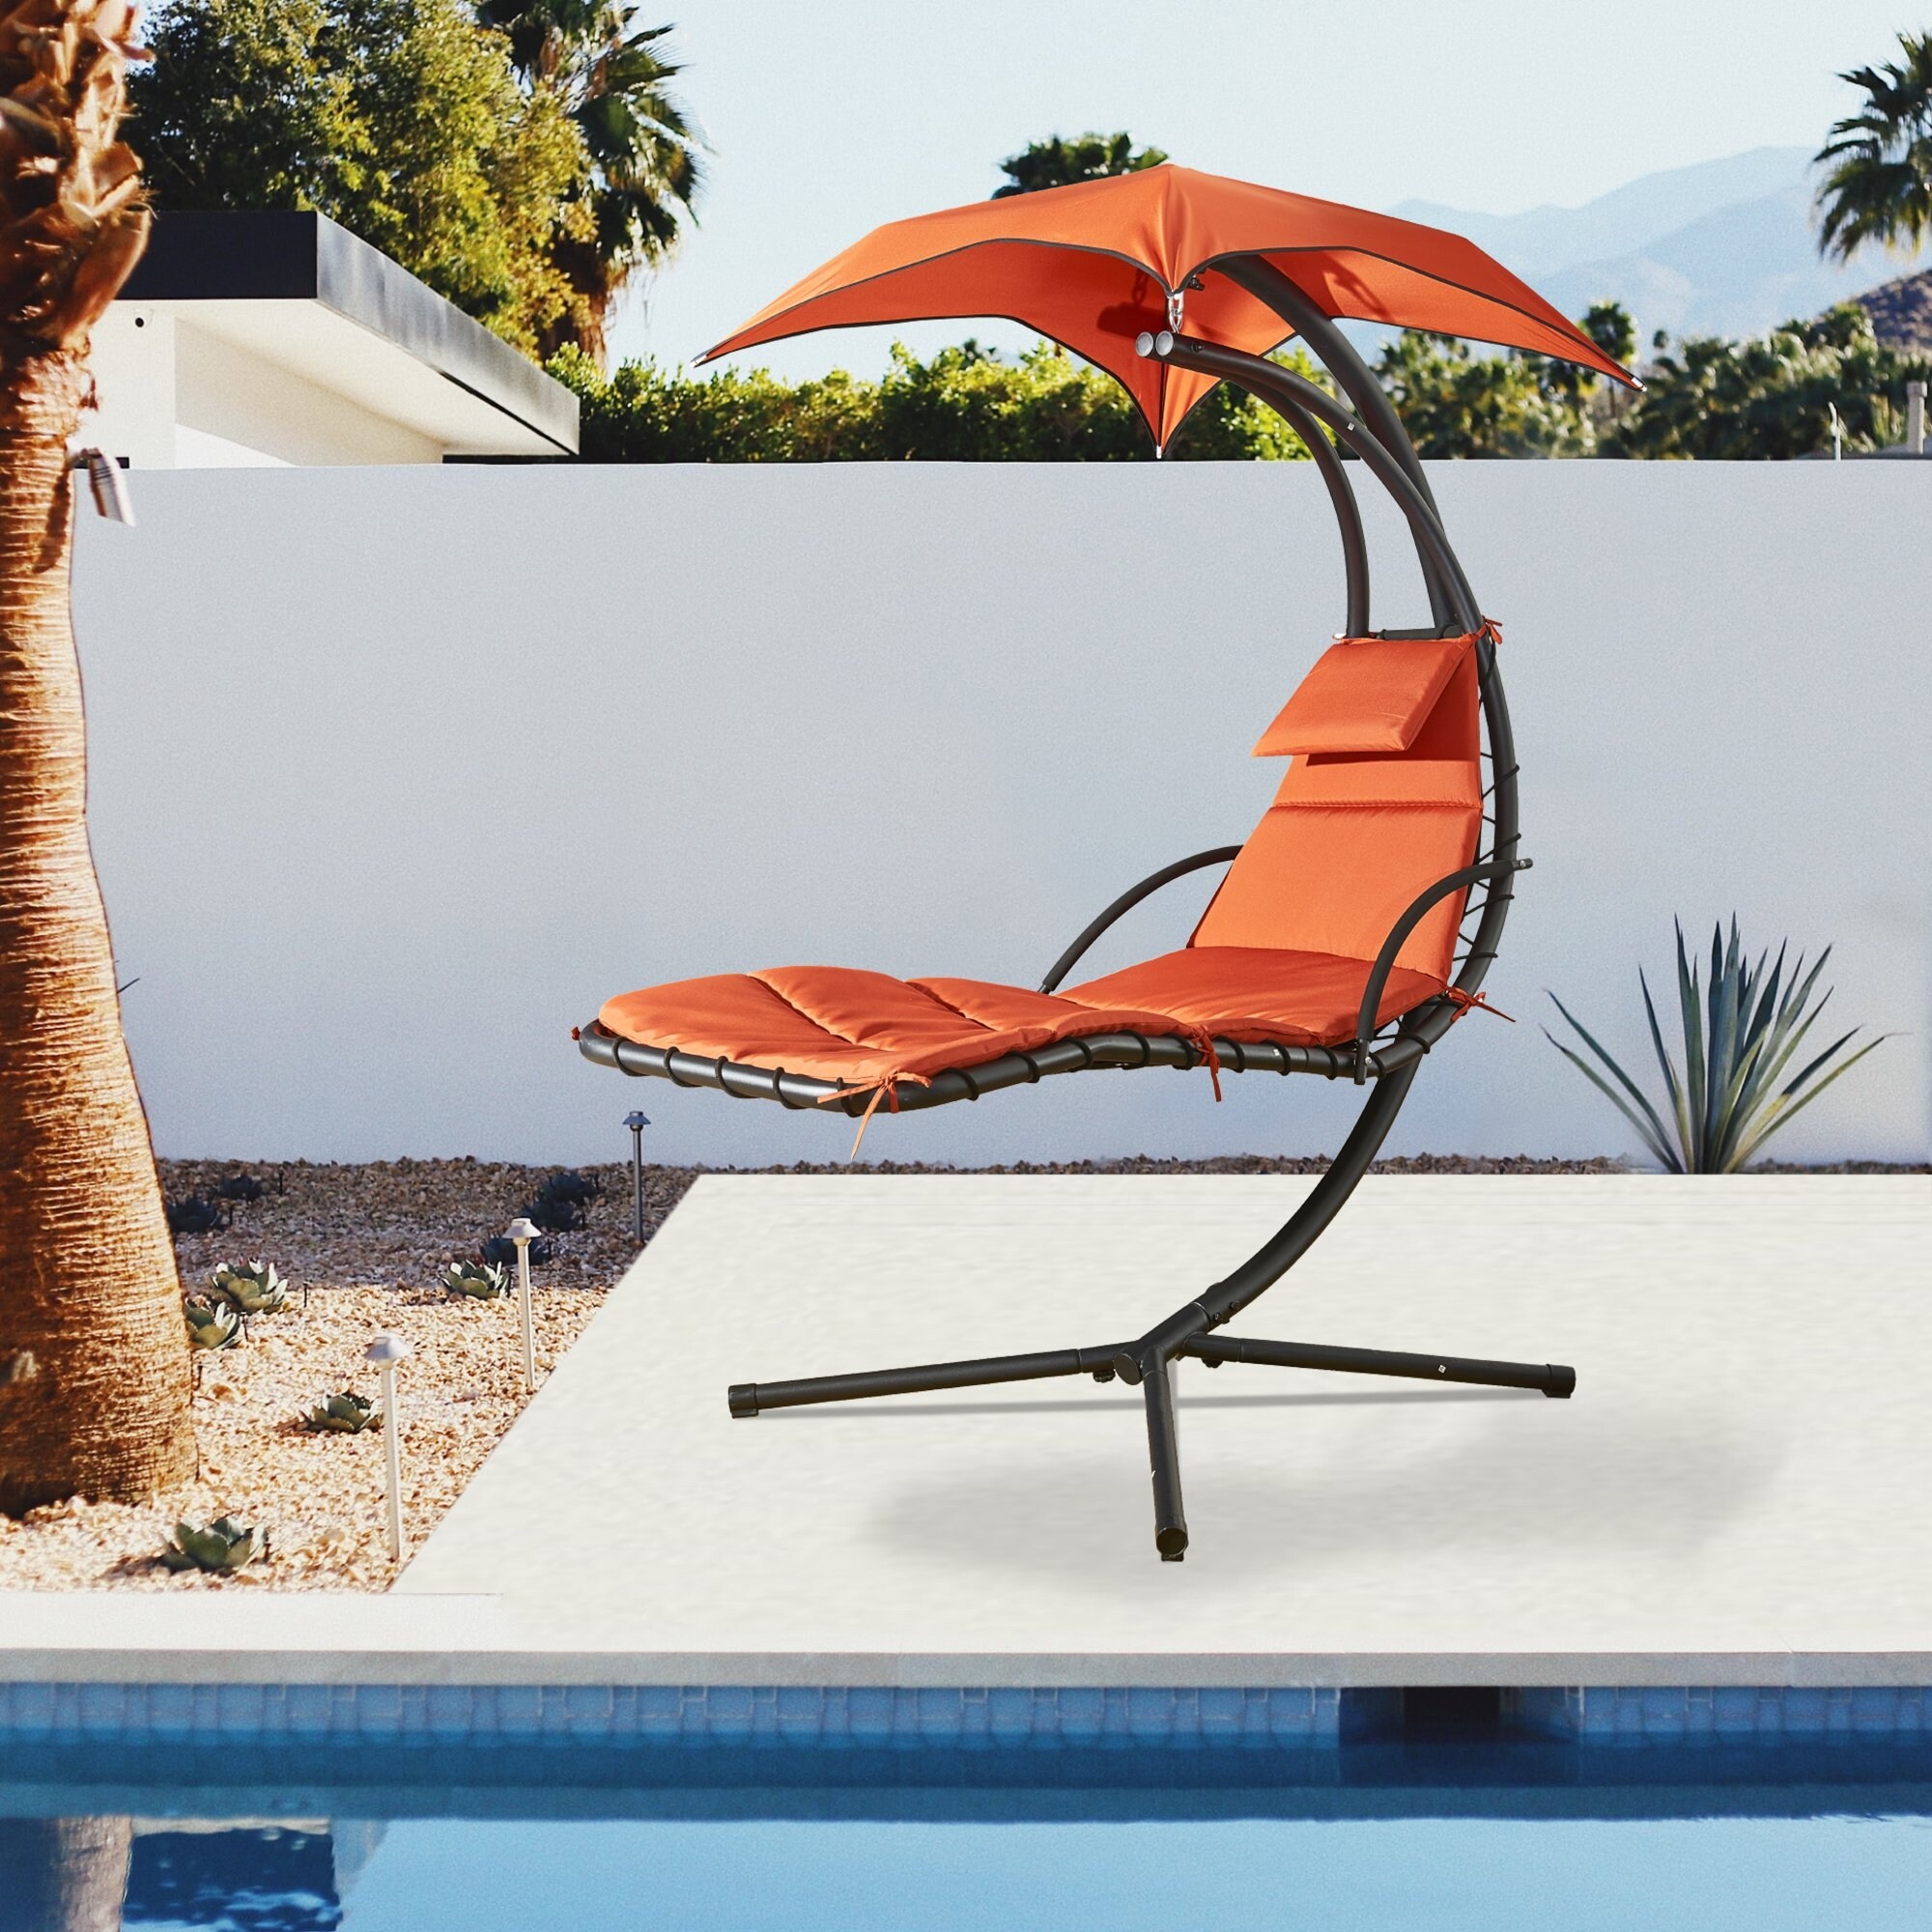 Amarantos Hanging Chaise Lounge Chair Canopy Floating Chaise Lounger Swing Hammock Chair, for Patio, Garden, Deck and Poolside